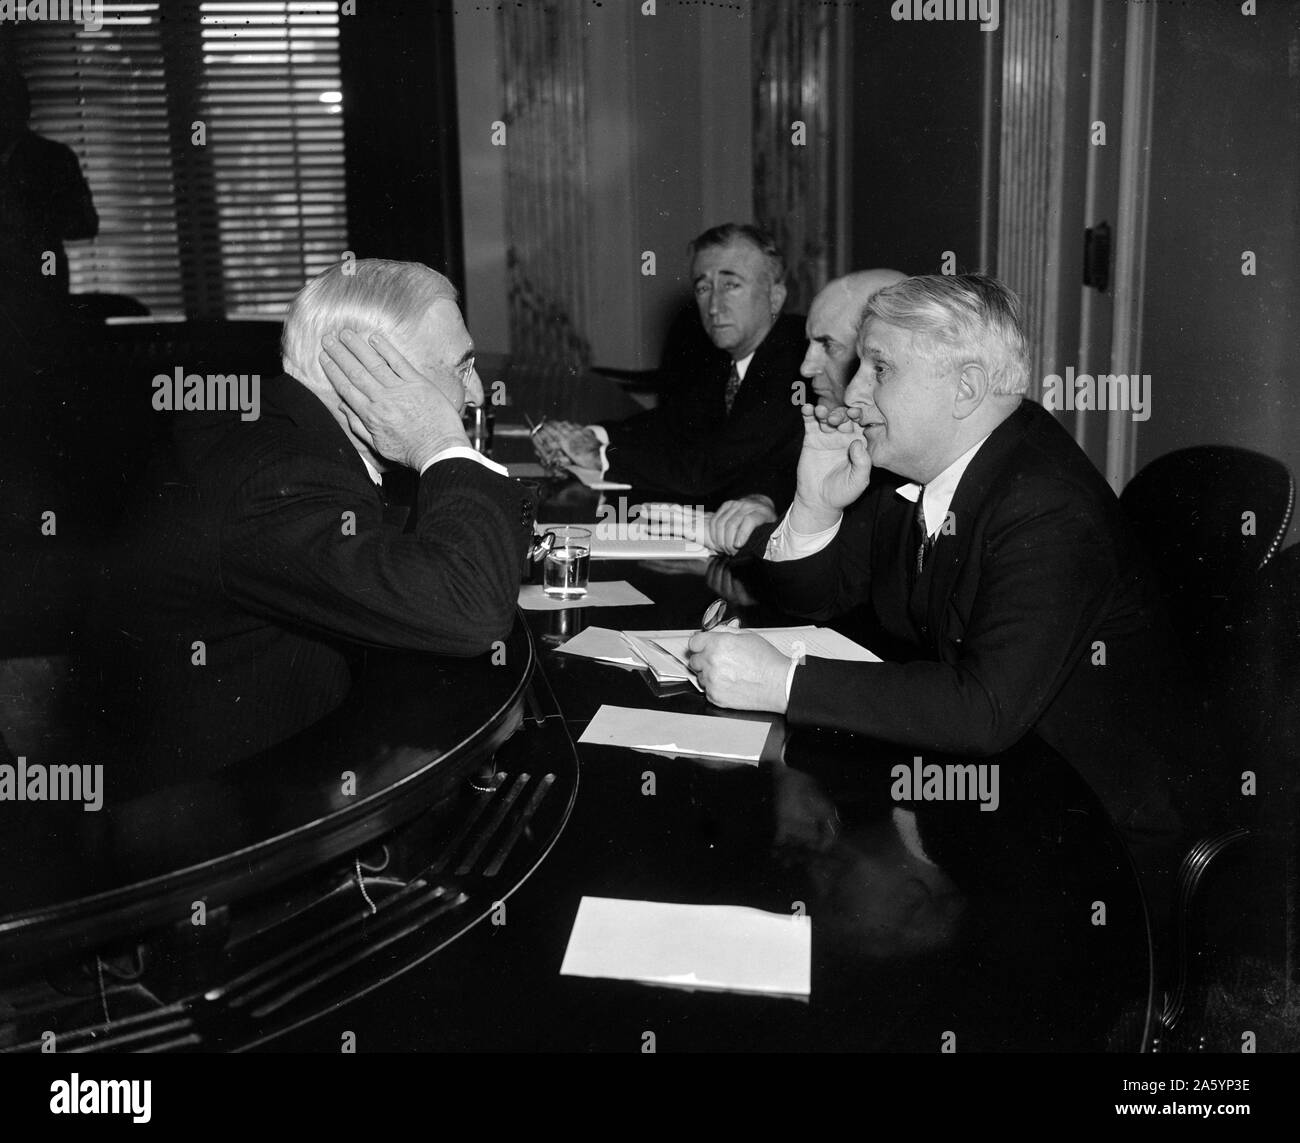 Washington, D.C., Feb. 28. Senator James J. Davis (left), Republican of Pennsylvania, gets another earful from Bernard Baruch following the noted Financier's blaming of the new deal policies for present unemployment before the Senate Unemployment and Relief Committee today. 1938 Stock Photo